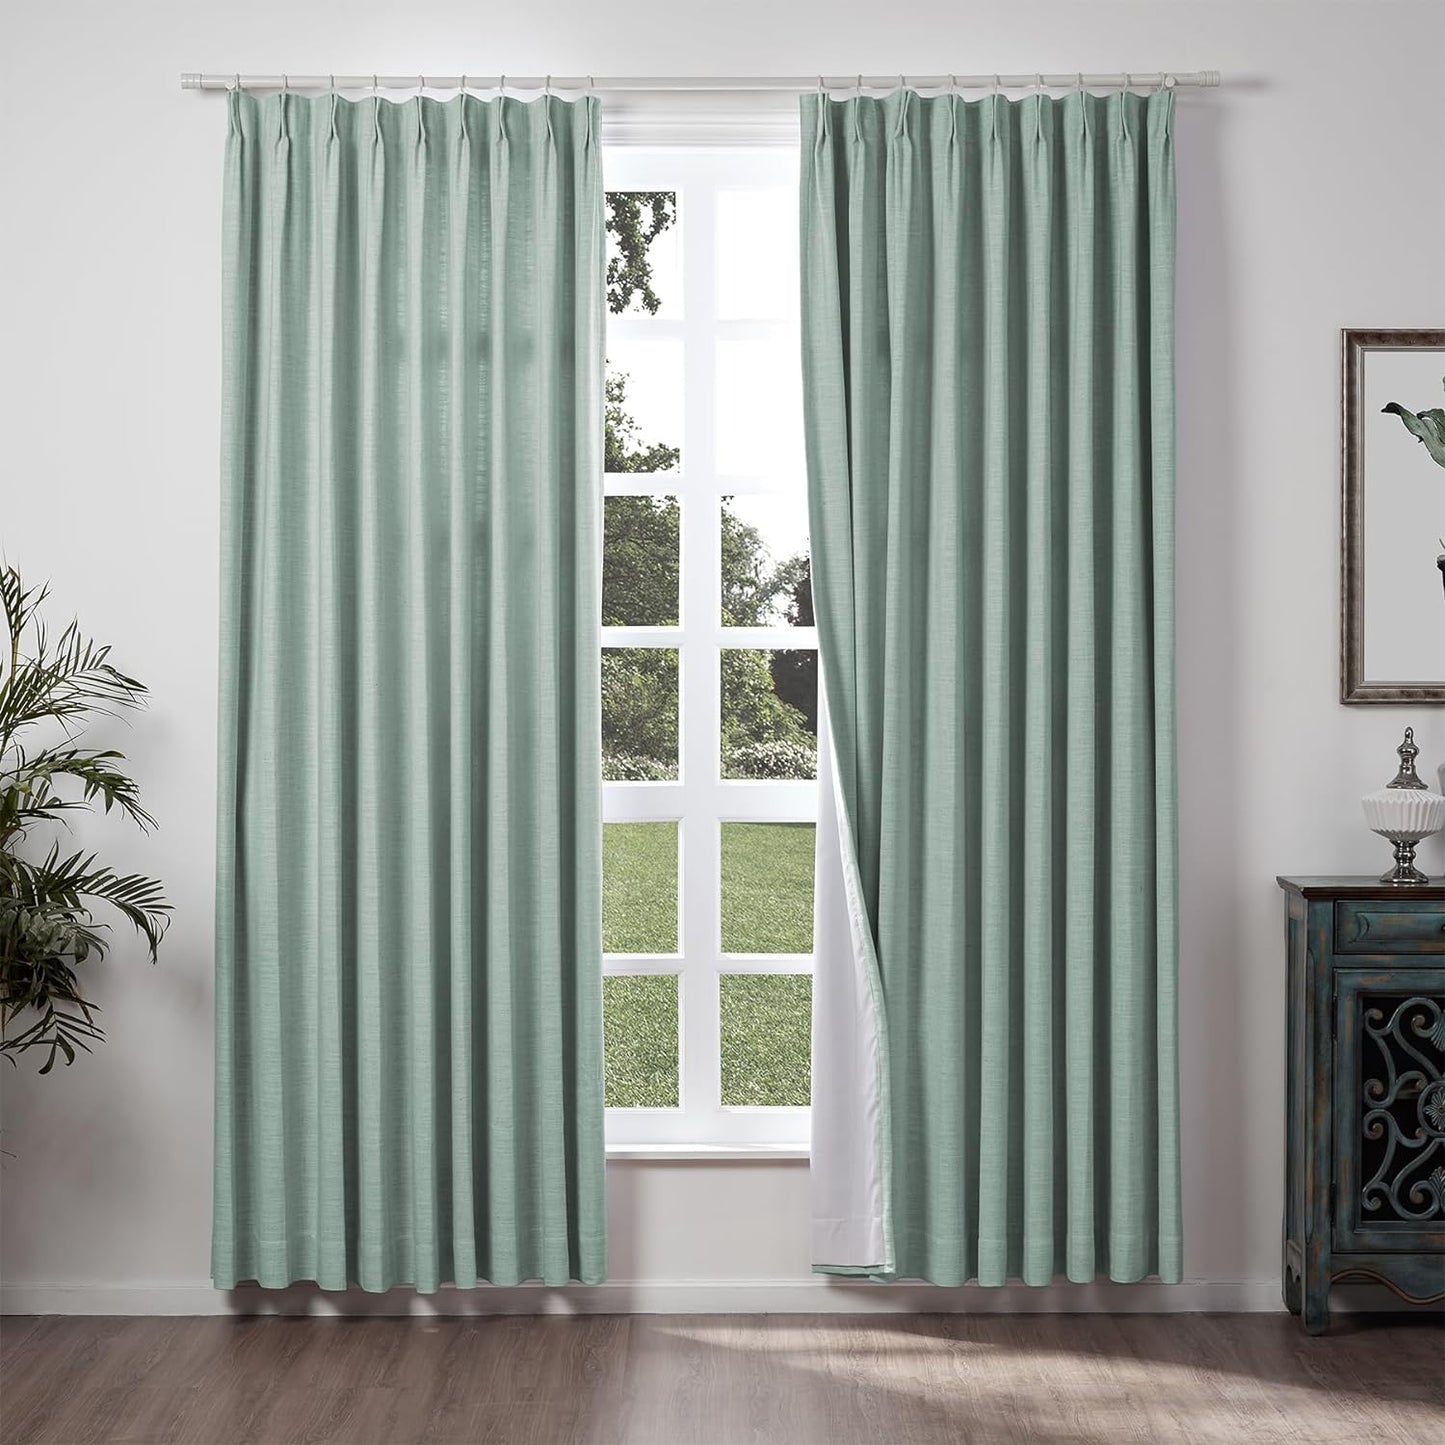 Chadmade 50" W X 63" L Polyester Linen Drape with Blackout Lining Pinch Pleat Curtain for Sliding Door Patio Door Living Room Bedroom, (1 Panel) Sand Beige Tallis Collection  ChadMade Pale Blue (33) 120Wx84L 